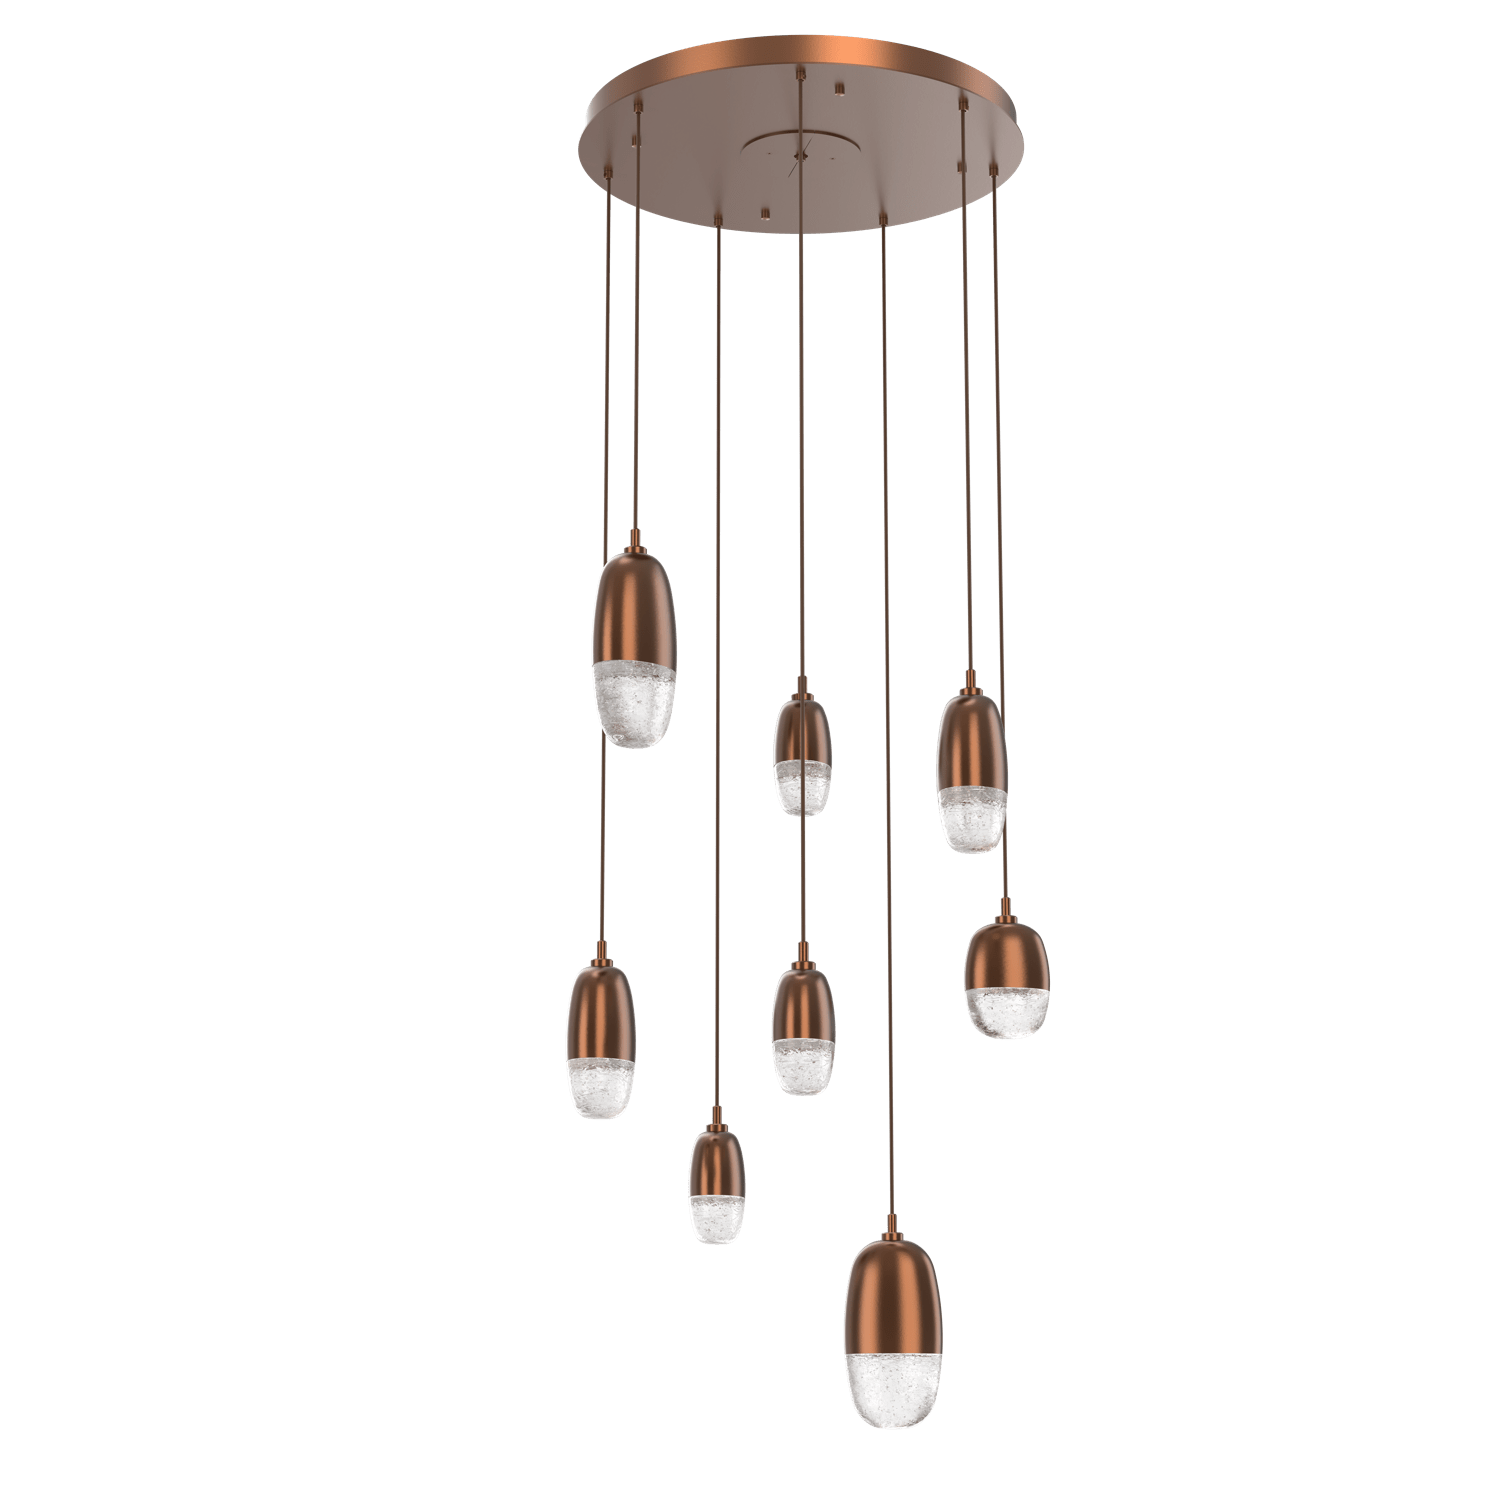 CHB0079-08-BB-Hammerton-Studio-Pebble-8-light-round-pendant-chandelier-with-burnished-bronze-finish-and-clear-cast-glass-shades-and-LED-lamping